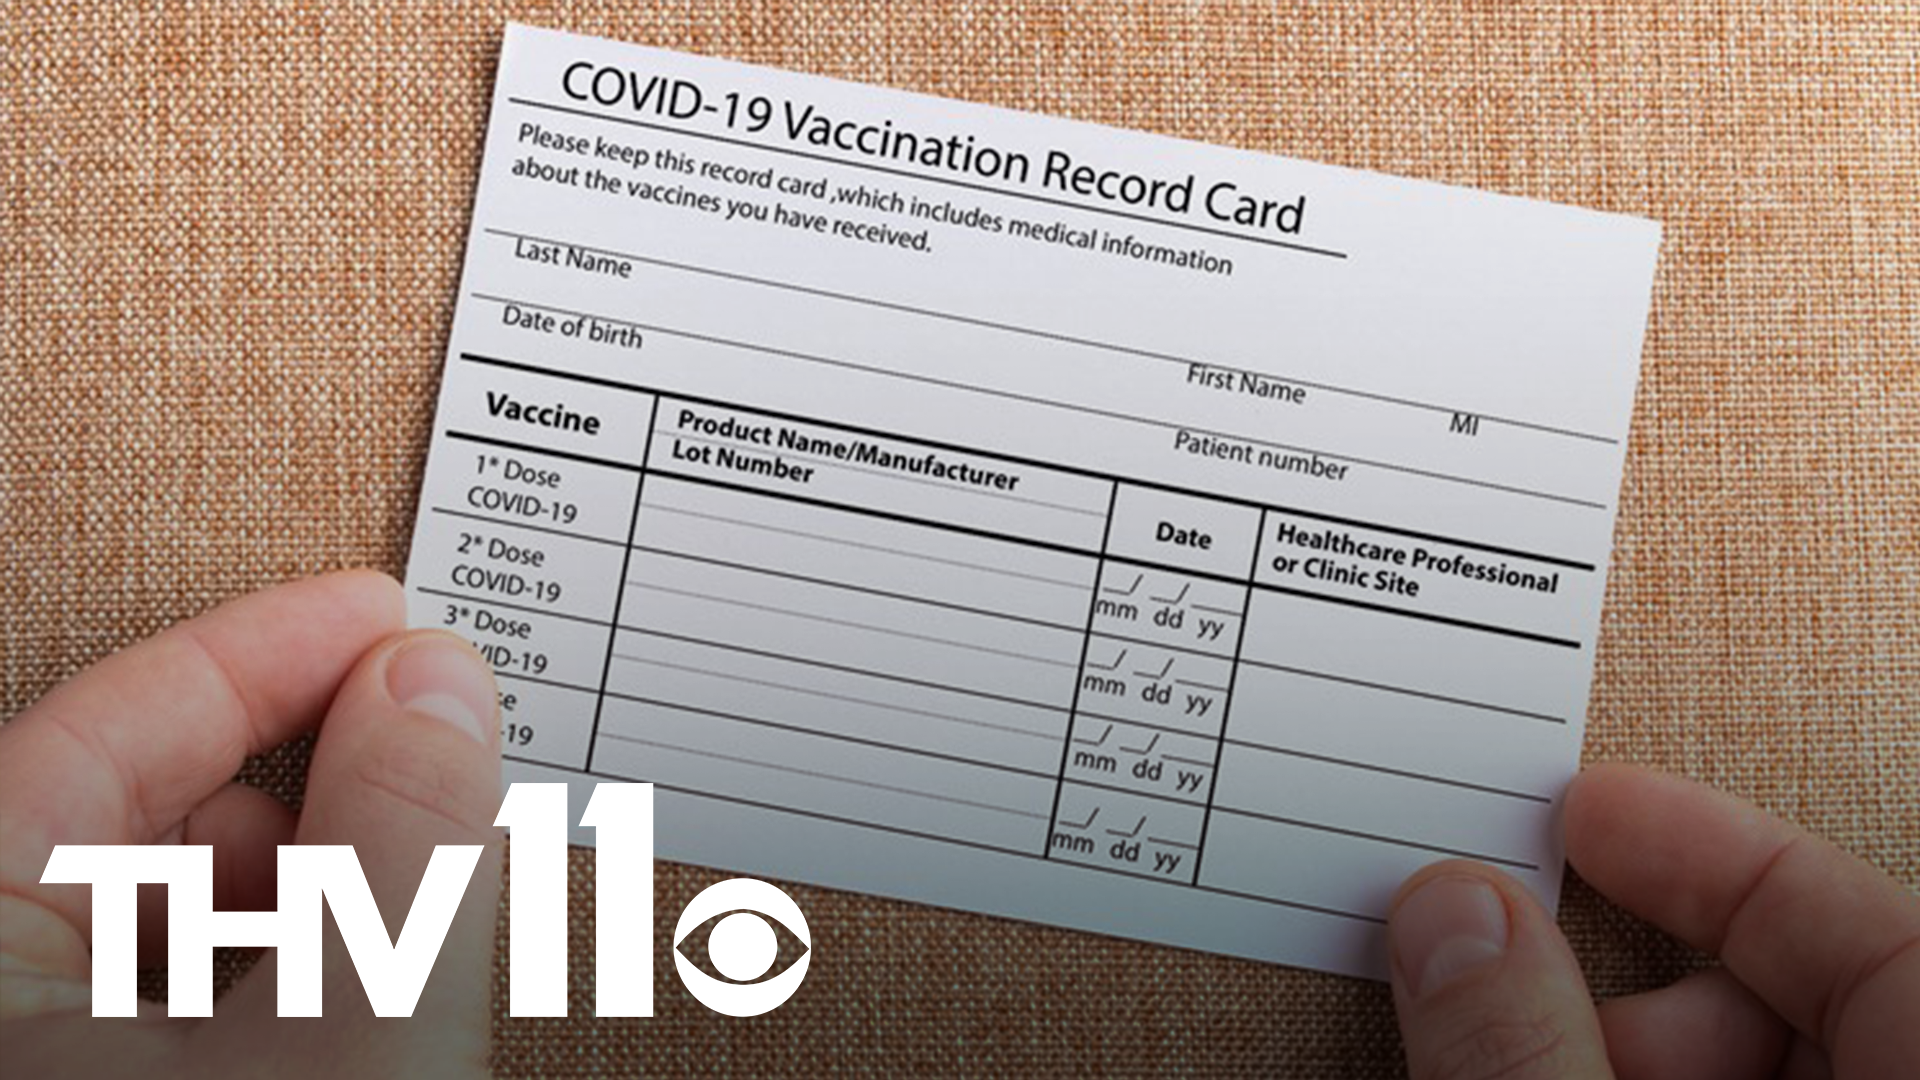 In an effort to keep vaccine cards safe, some have gone as far as to laminate their cards. But is that really a good idea?